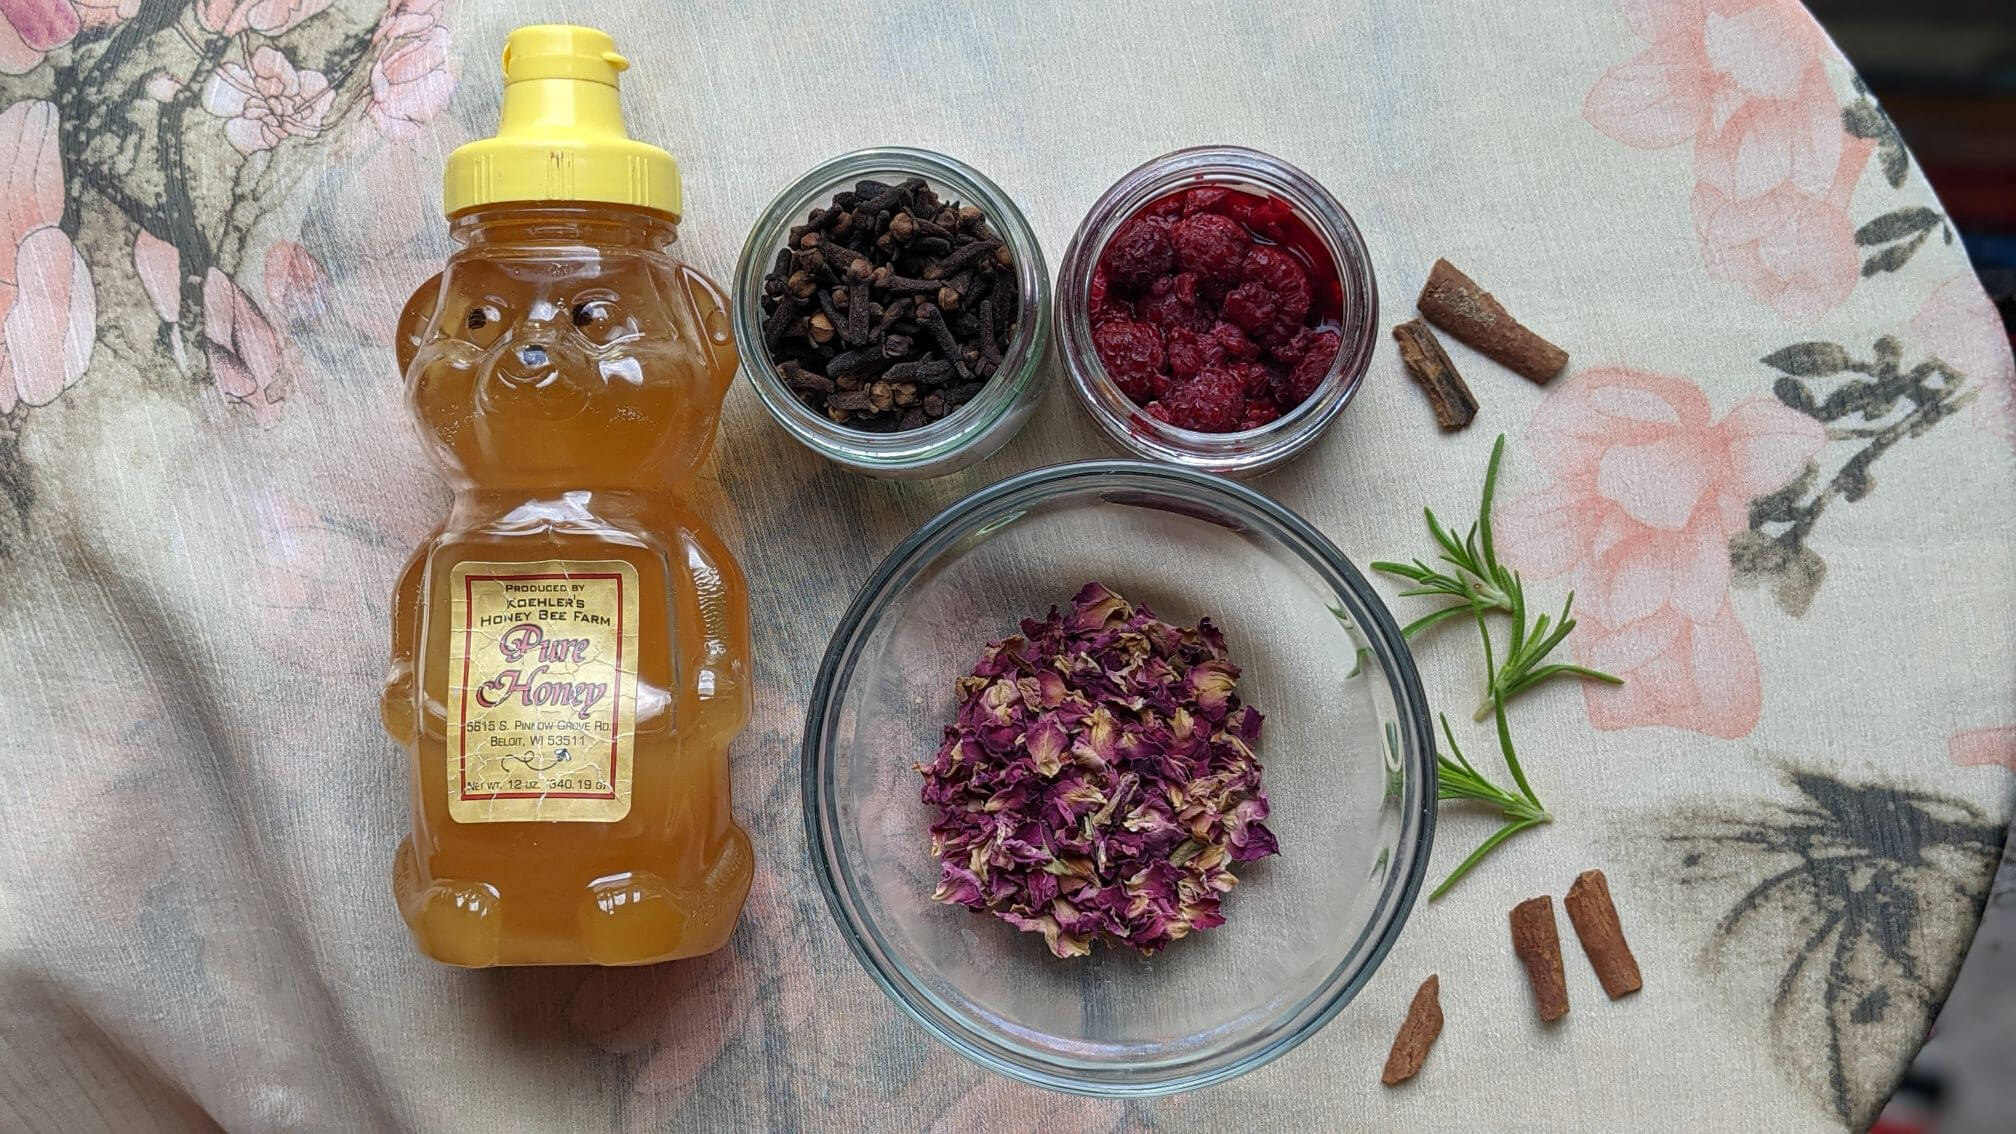 In natural light, a bear-shaped bottle of honey lays on a table next to shallow bowls containing dried rose petals, thawed frozen raspberries and cloves. Scattered next to the bowls are small stalks of cinnamon and a few sprigs of fresh rosemary.